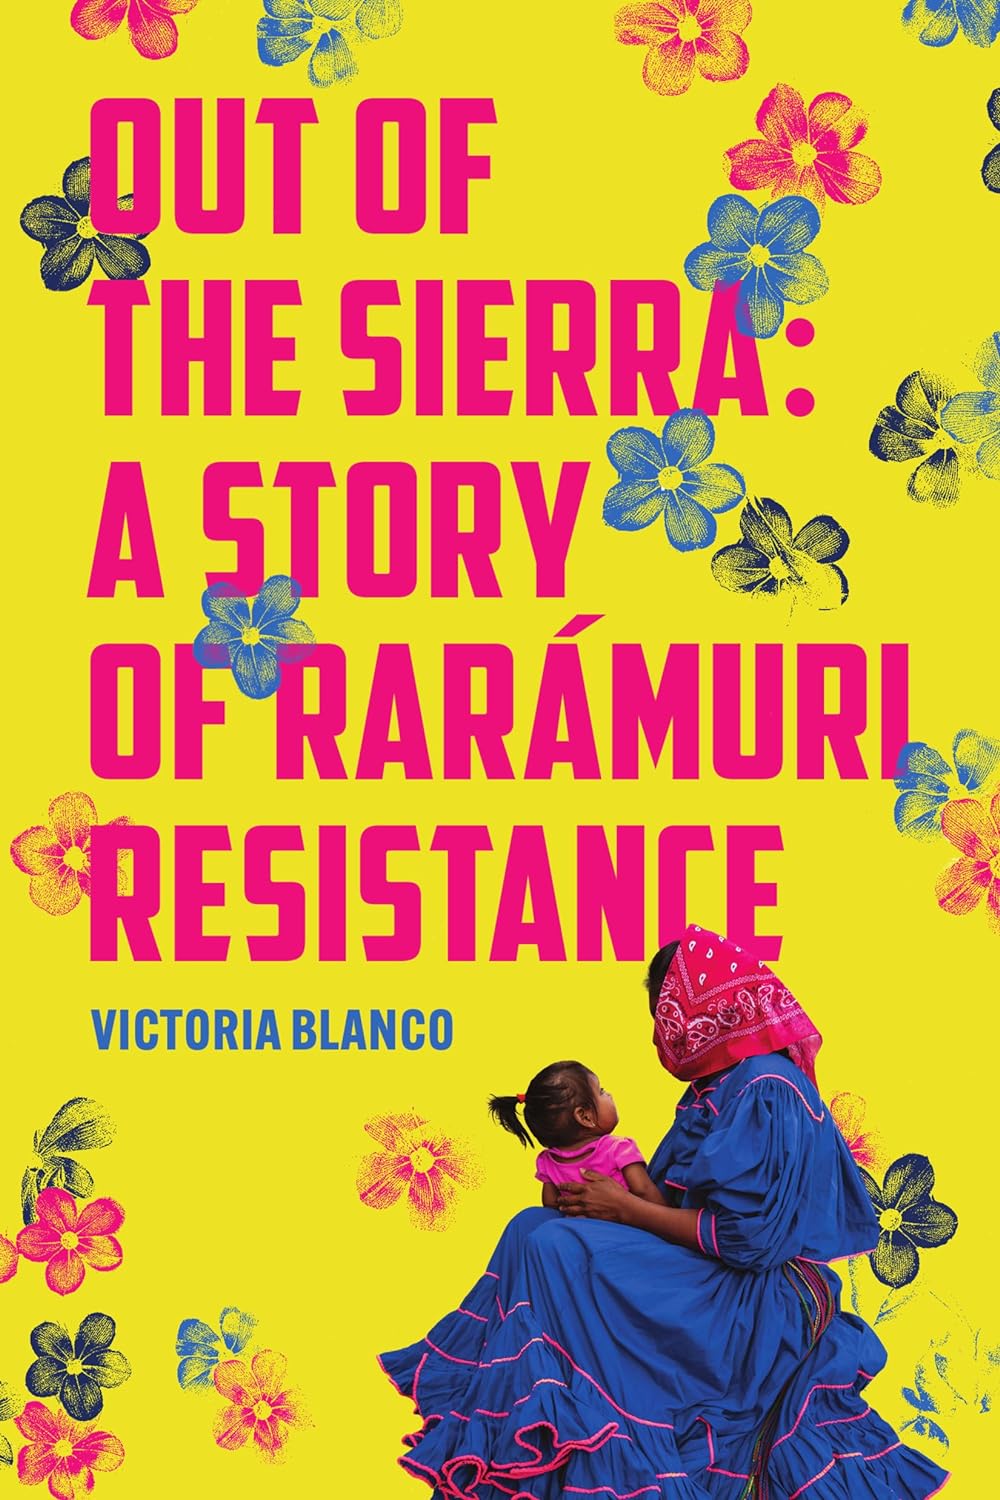 Out of the Sierra: A Story of Rarámuri Resistance by Victoria Blanco